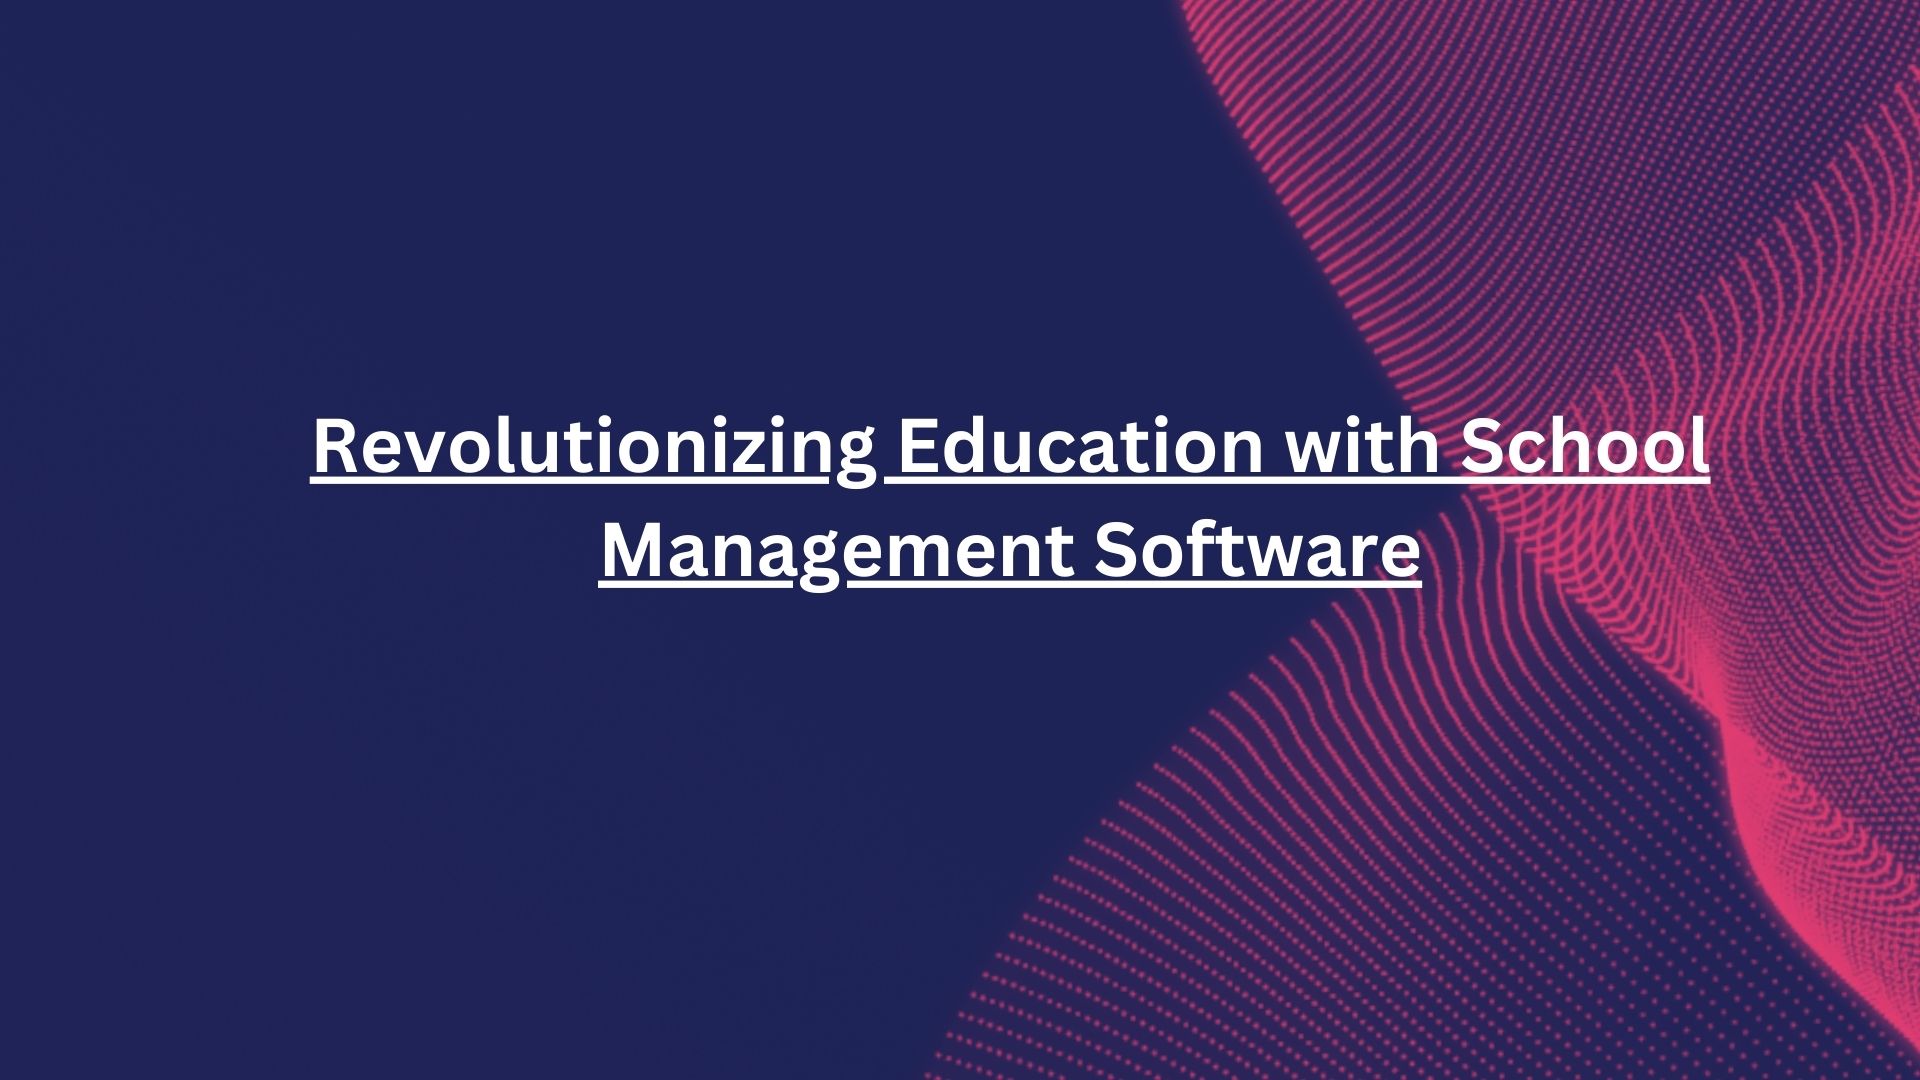 Revolutionizing Education with School Management Software